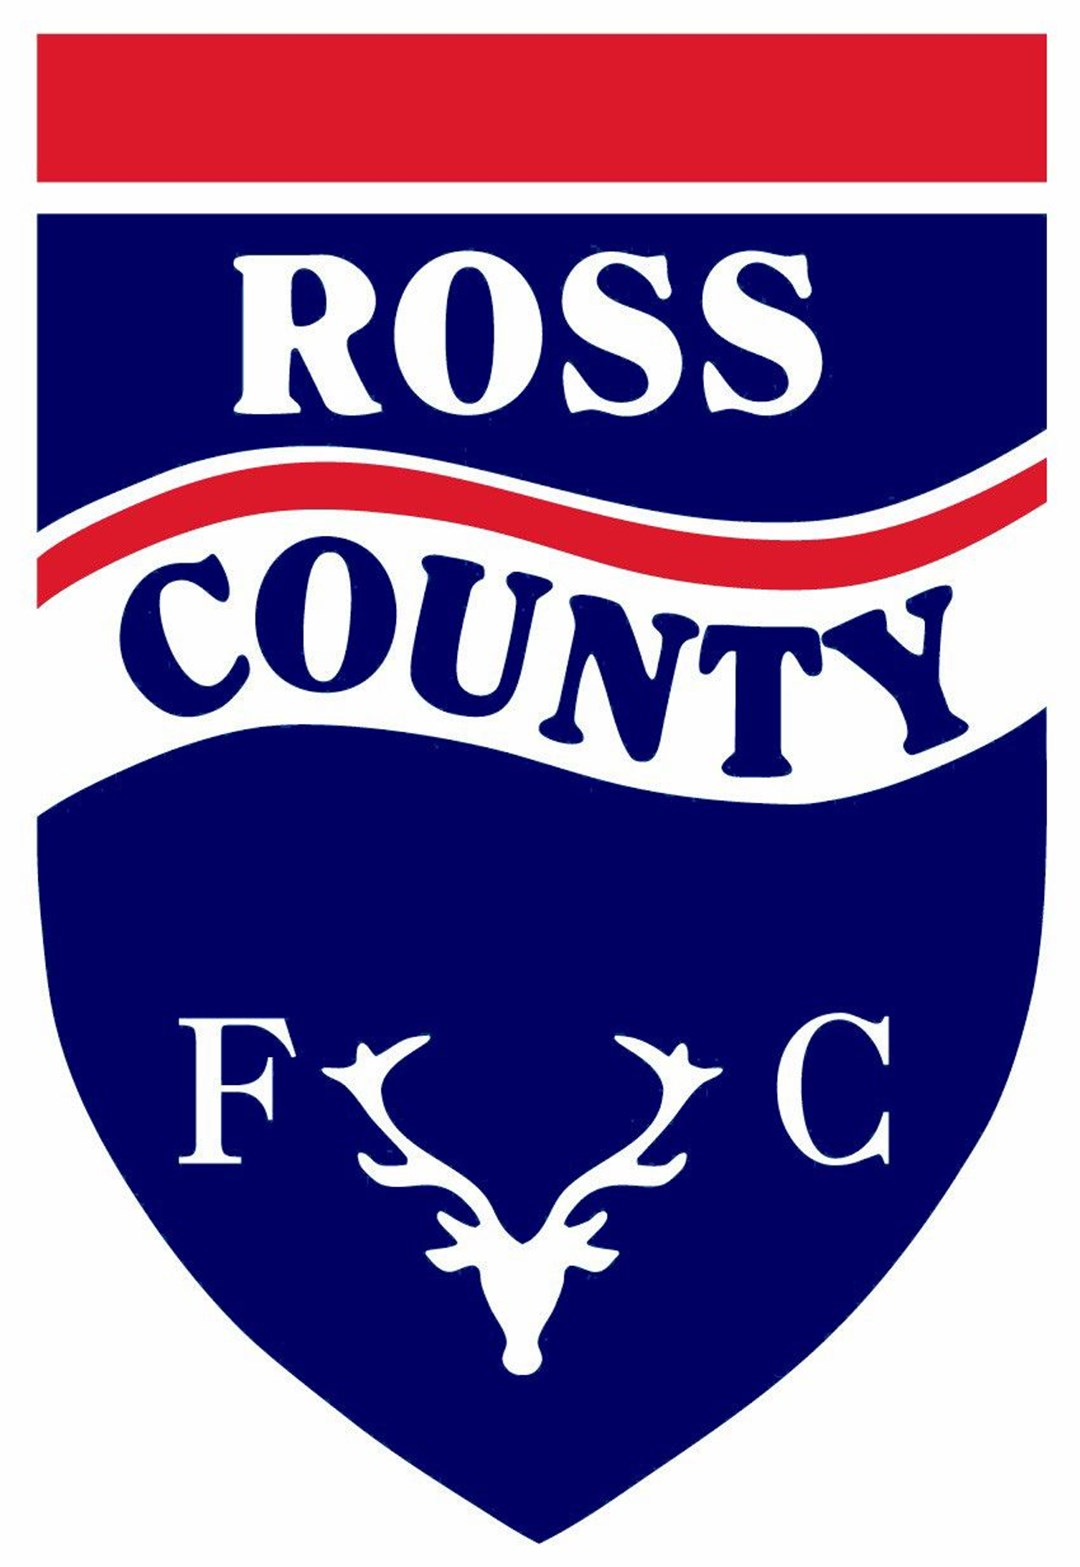 Ross County finished 10th in the Premiership last season.